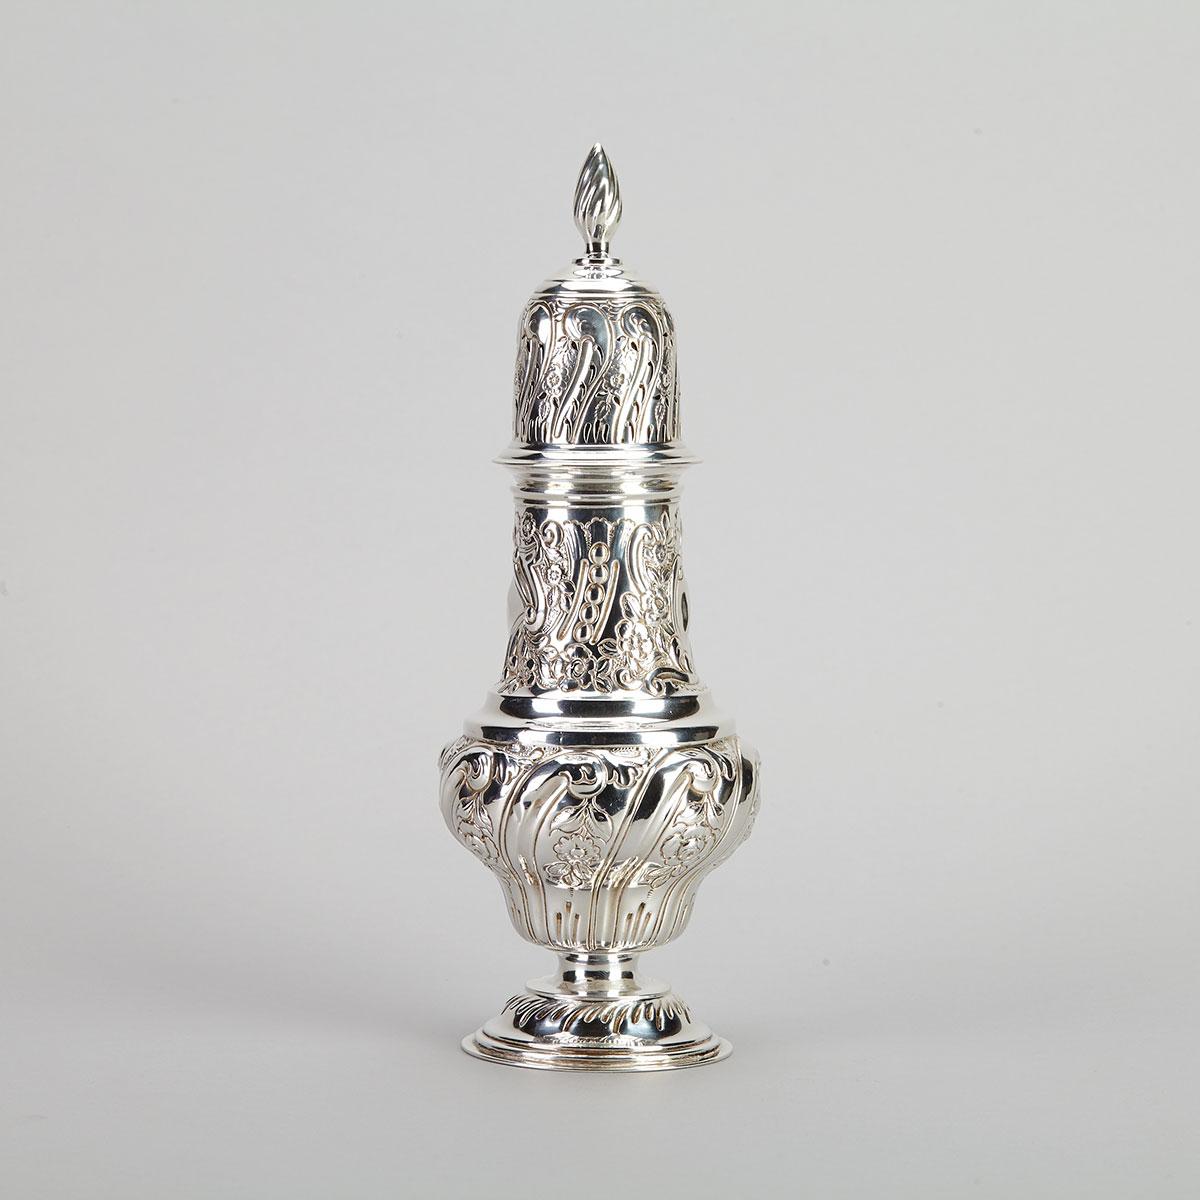 Edwardian Silver Large Caster, George Nathan & Ridley Hayes, Chester, 1902